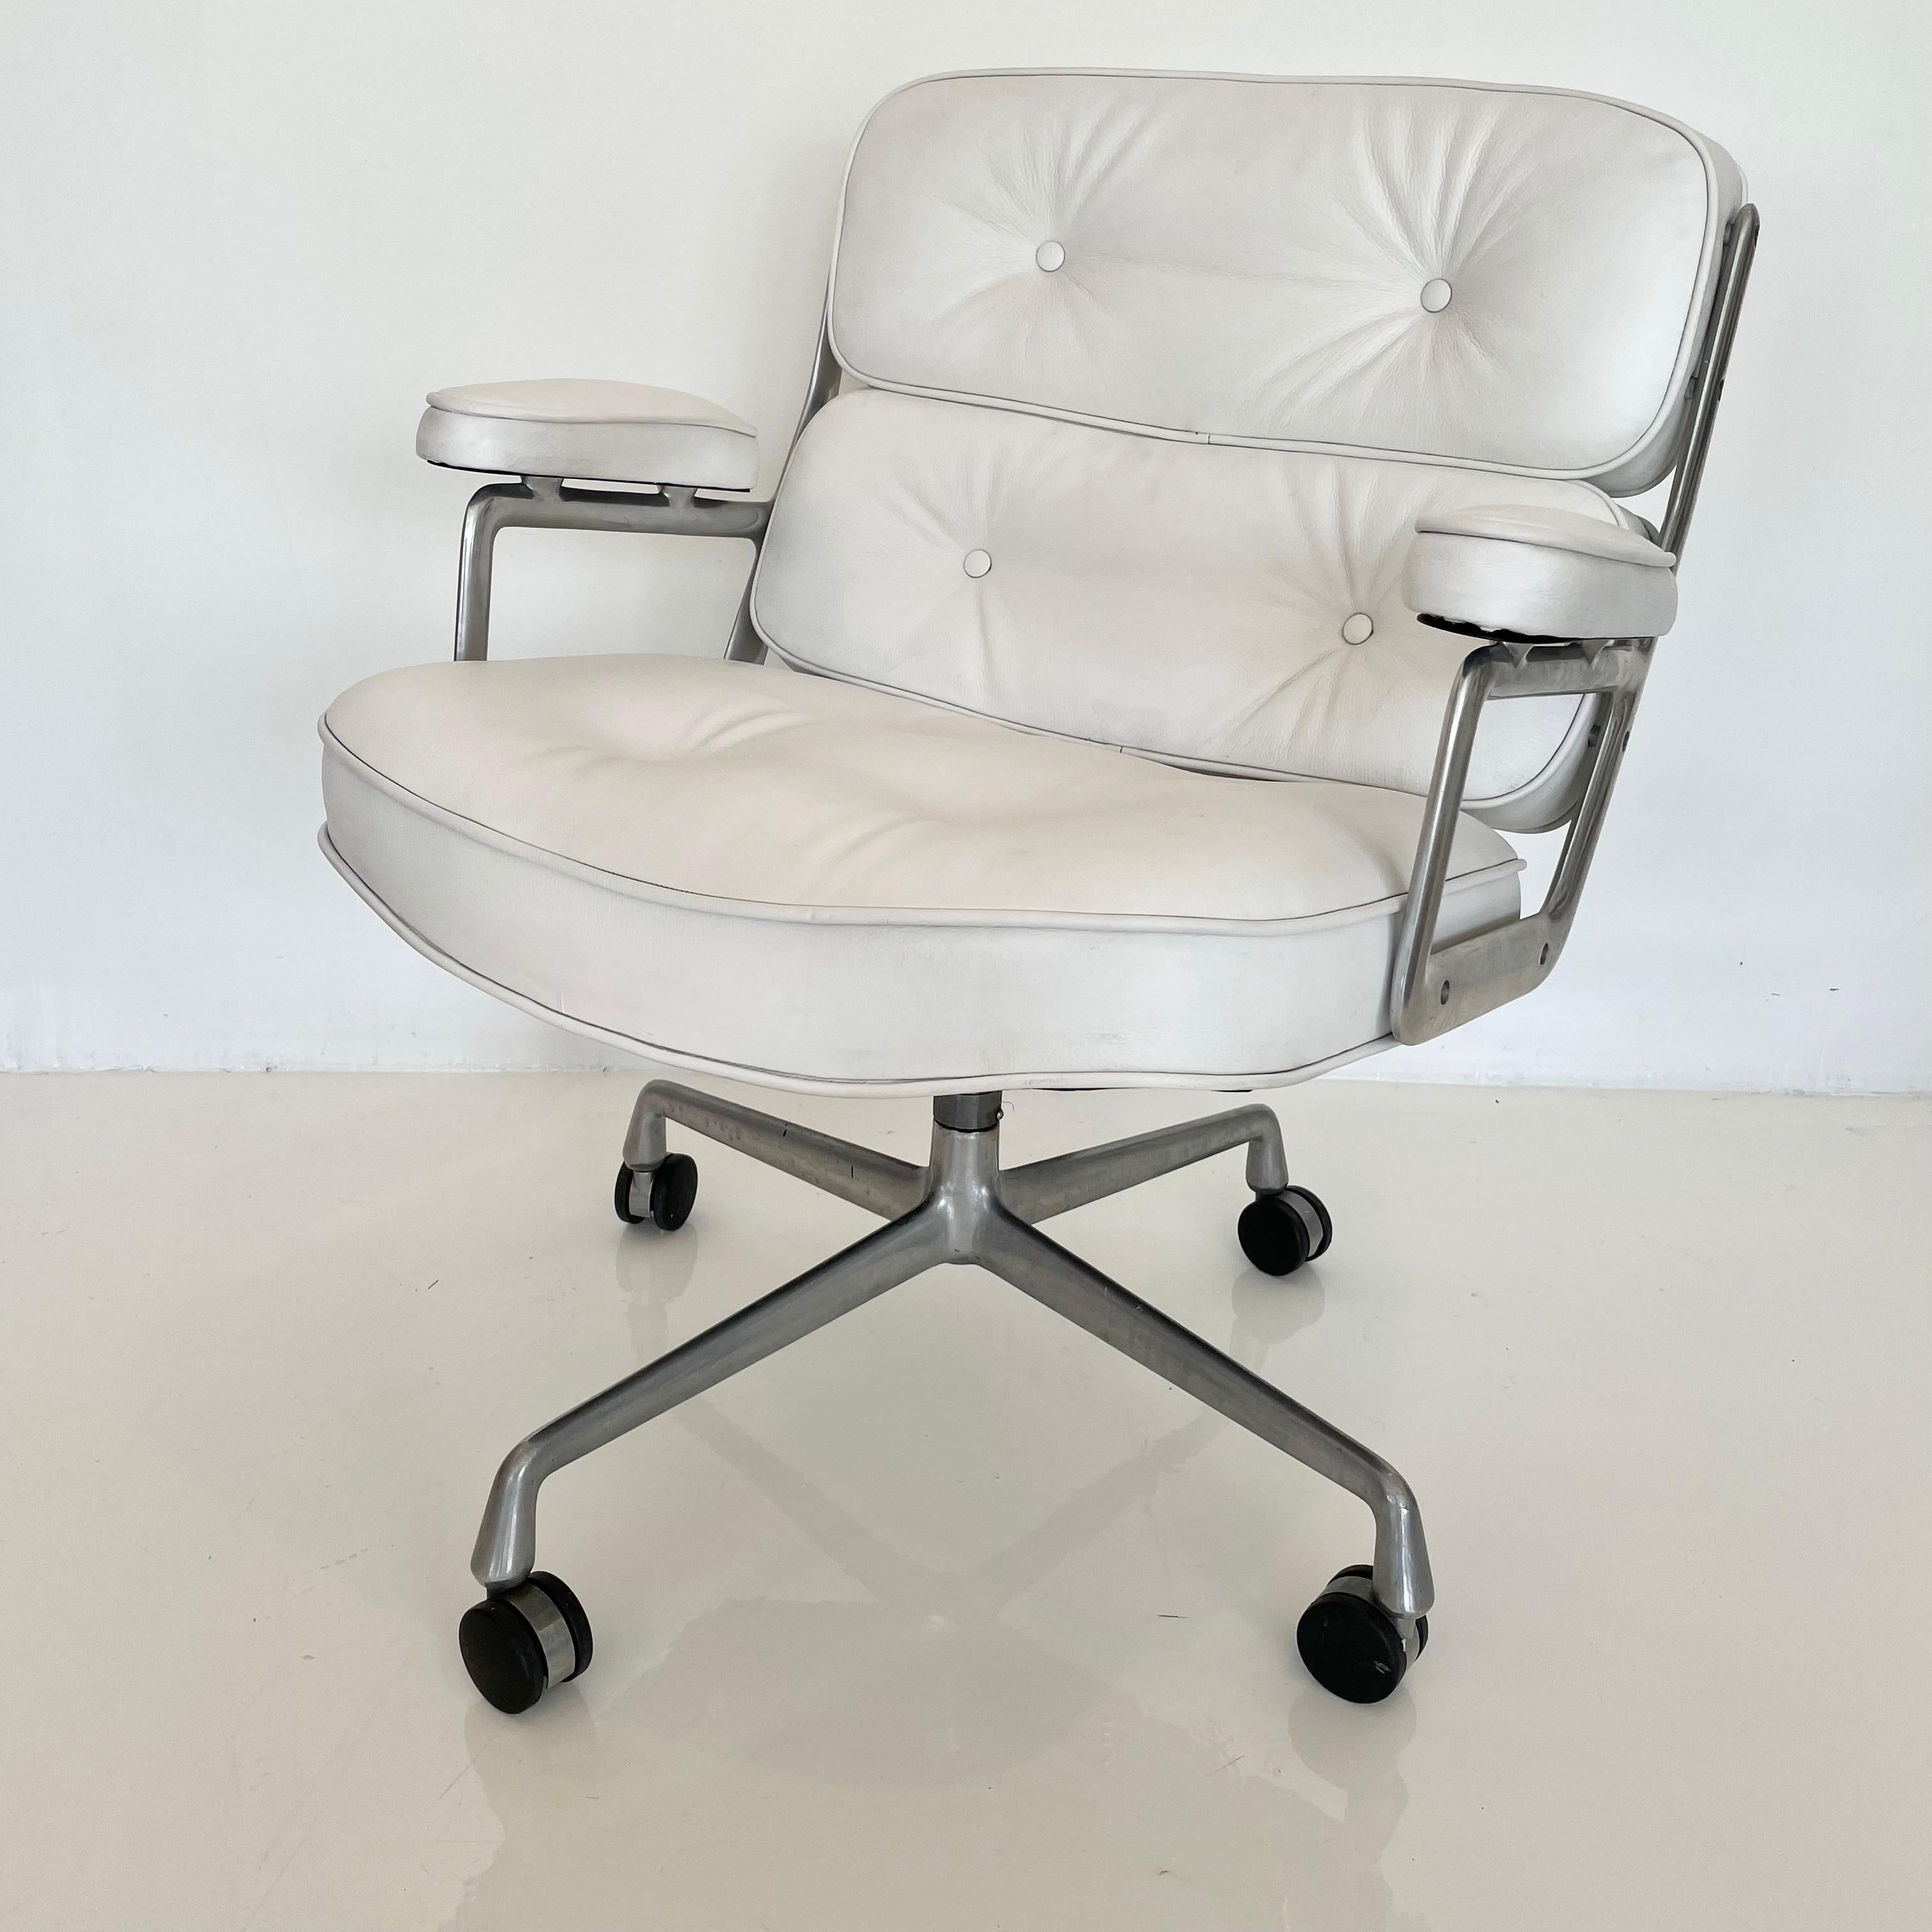 North American Original Eames Time Life Chair in White Leather